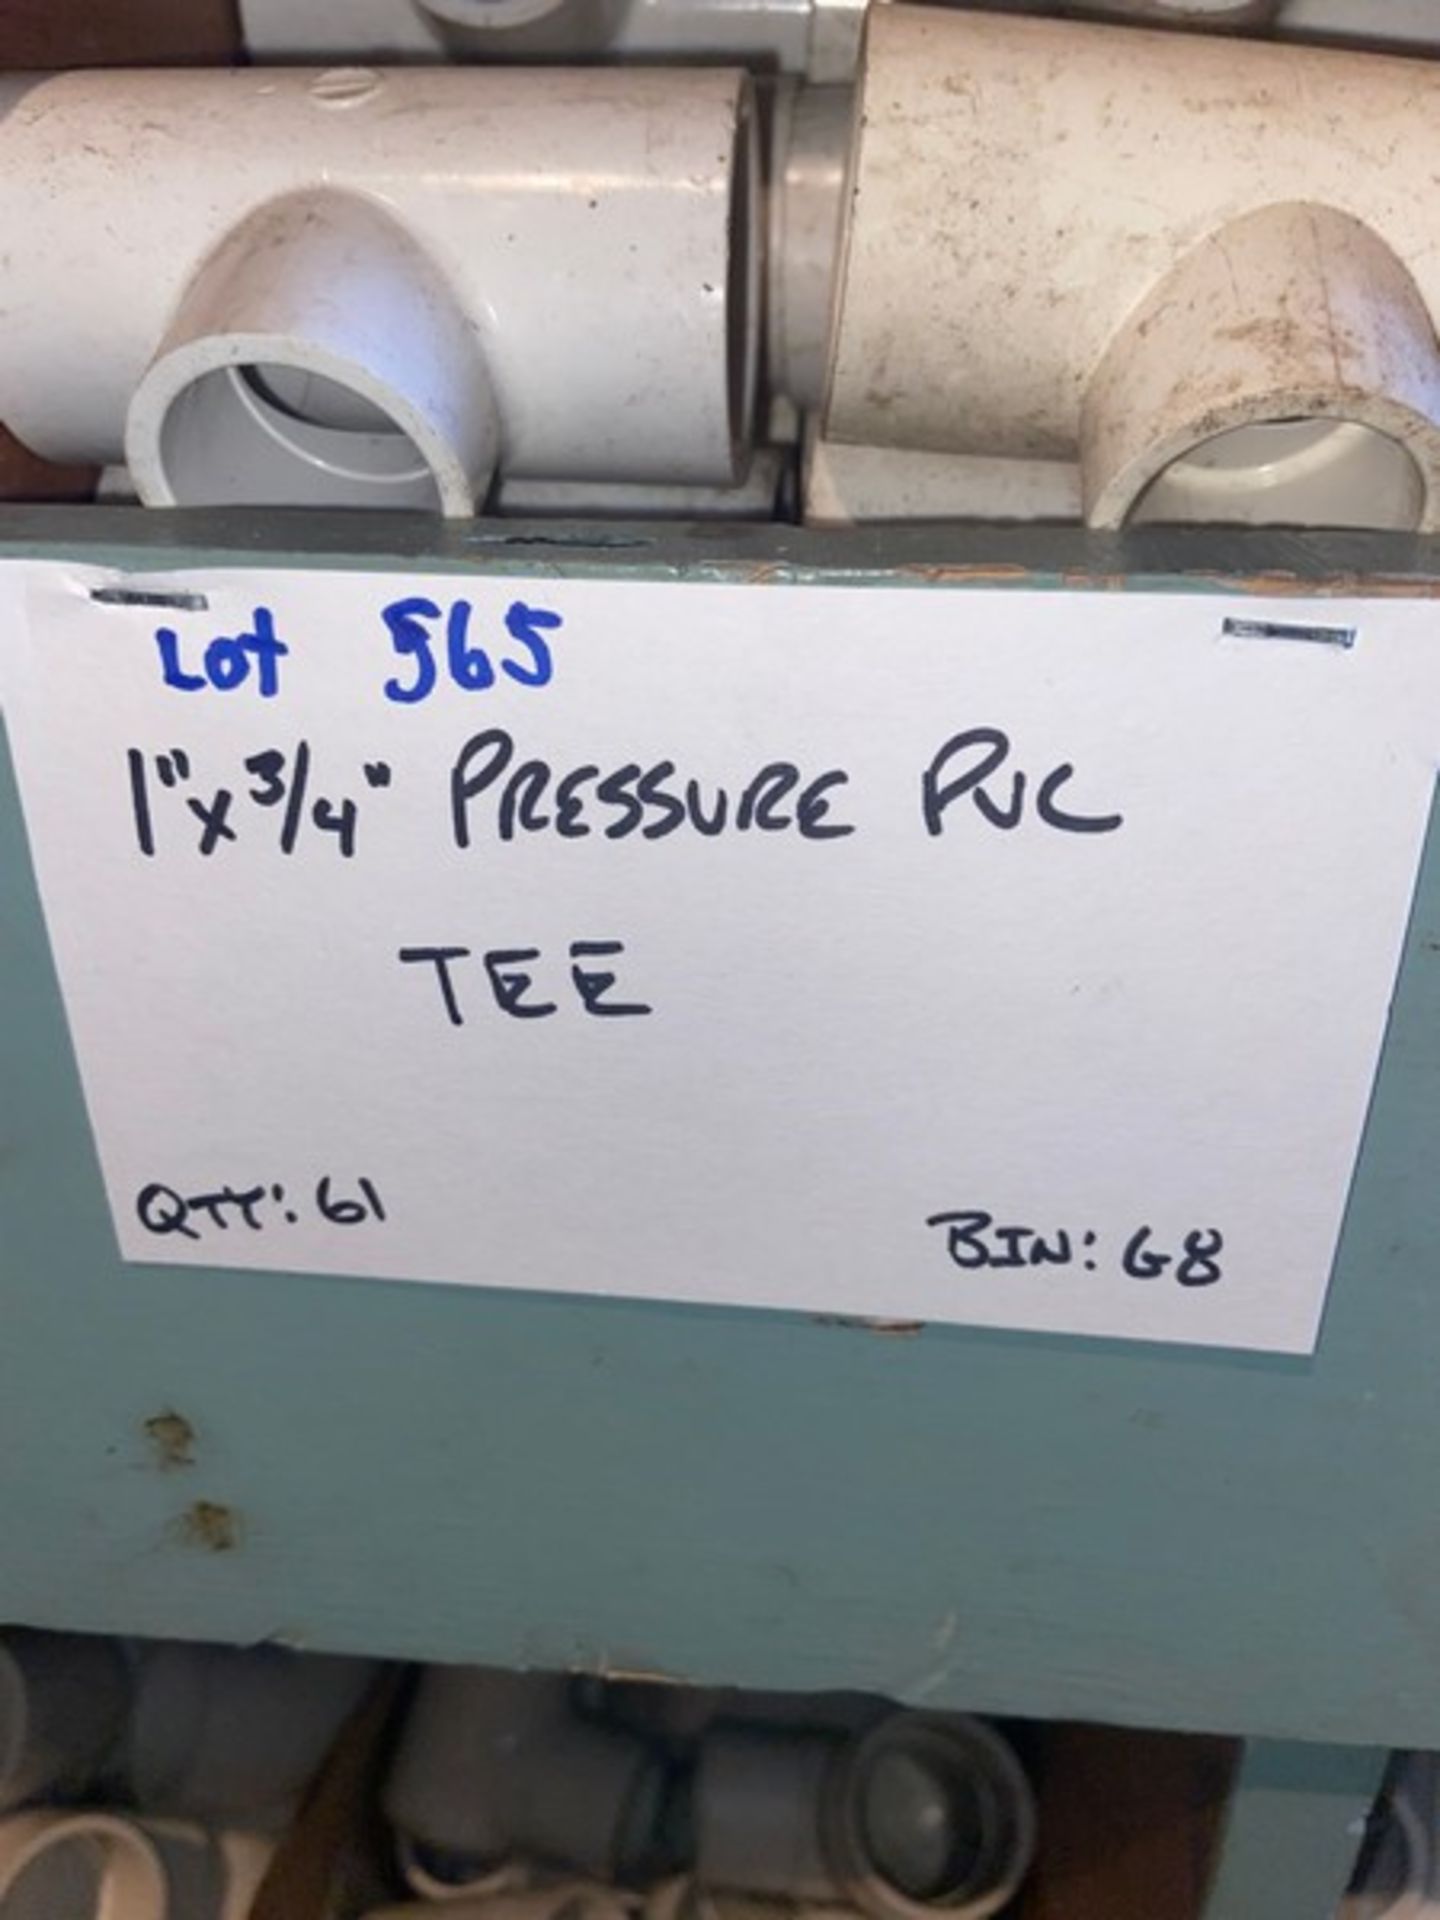 (61) 1" x 3/4" Pressure PVC Tee (Bin: G8) (LOCATED IN MONROEVILLE, PA) - Image 3 of 3